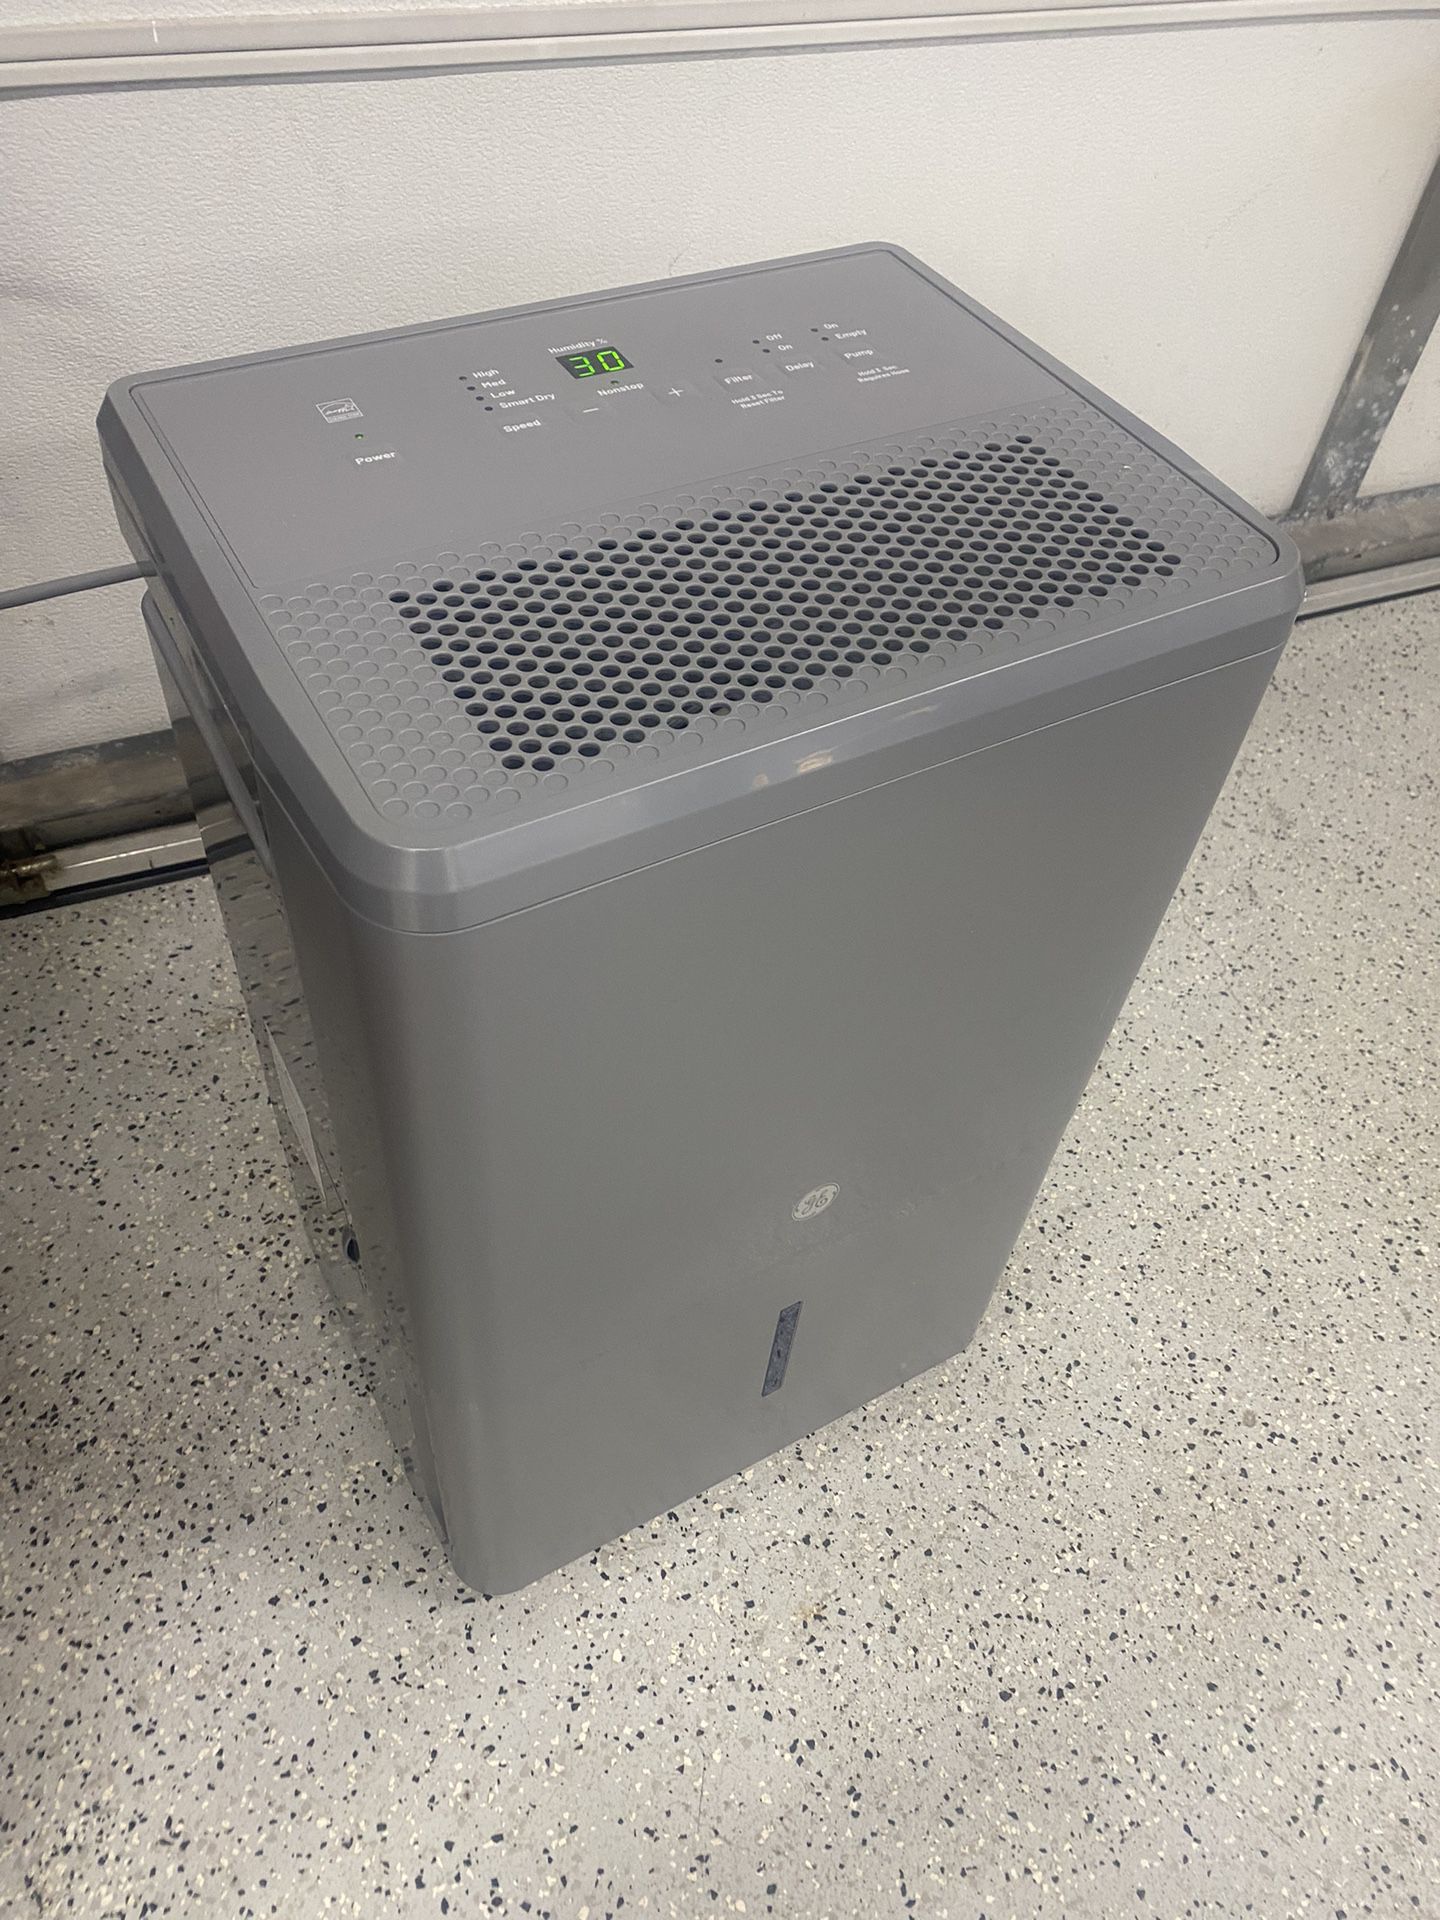 GE Dehumidifier with Built-in Pump 